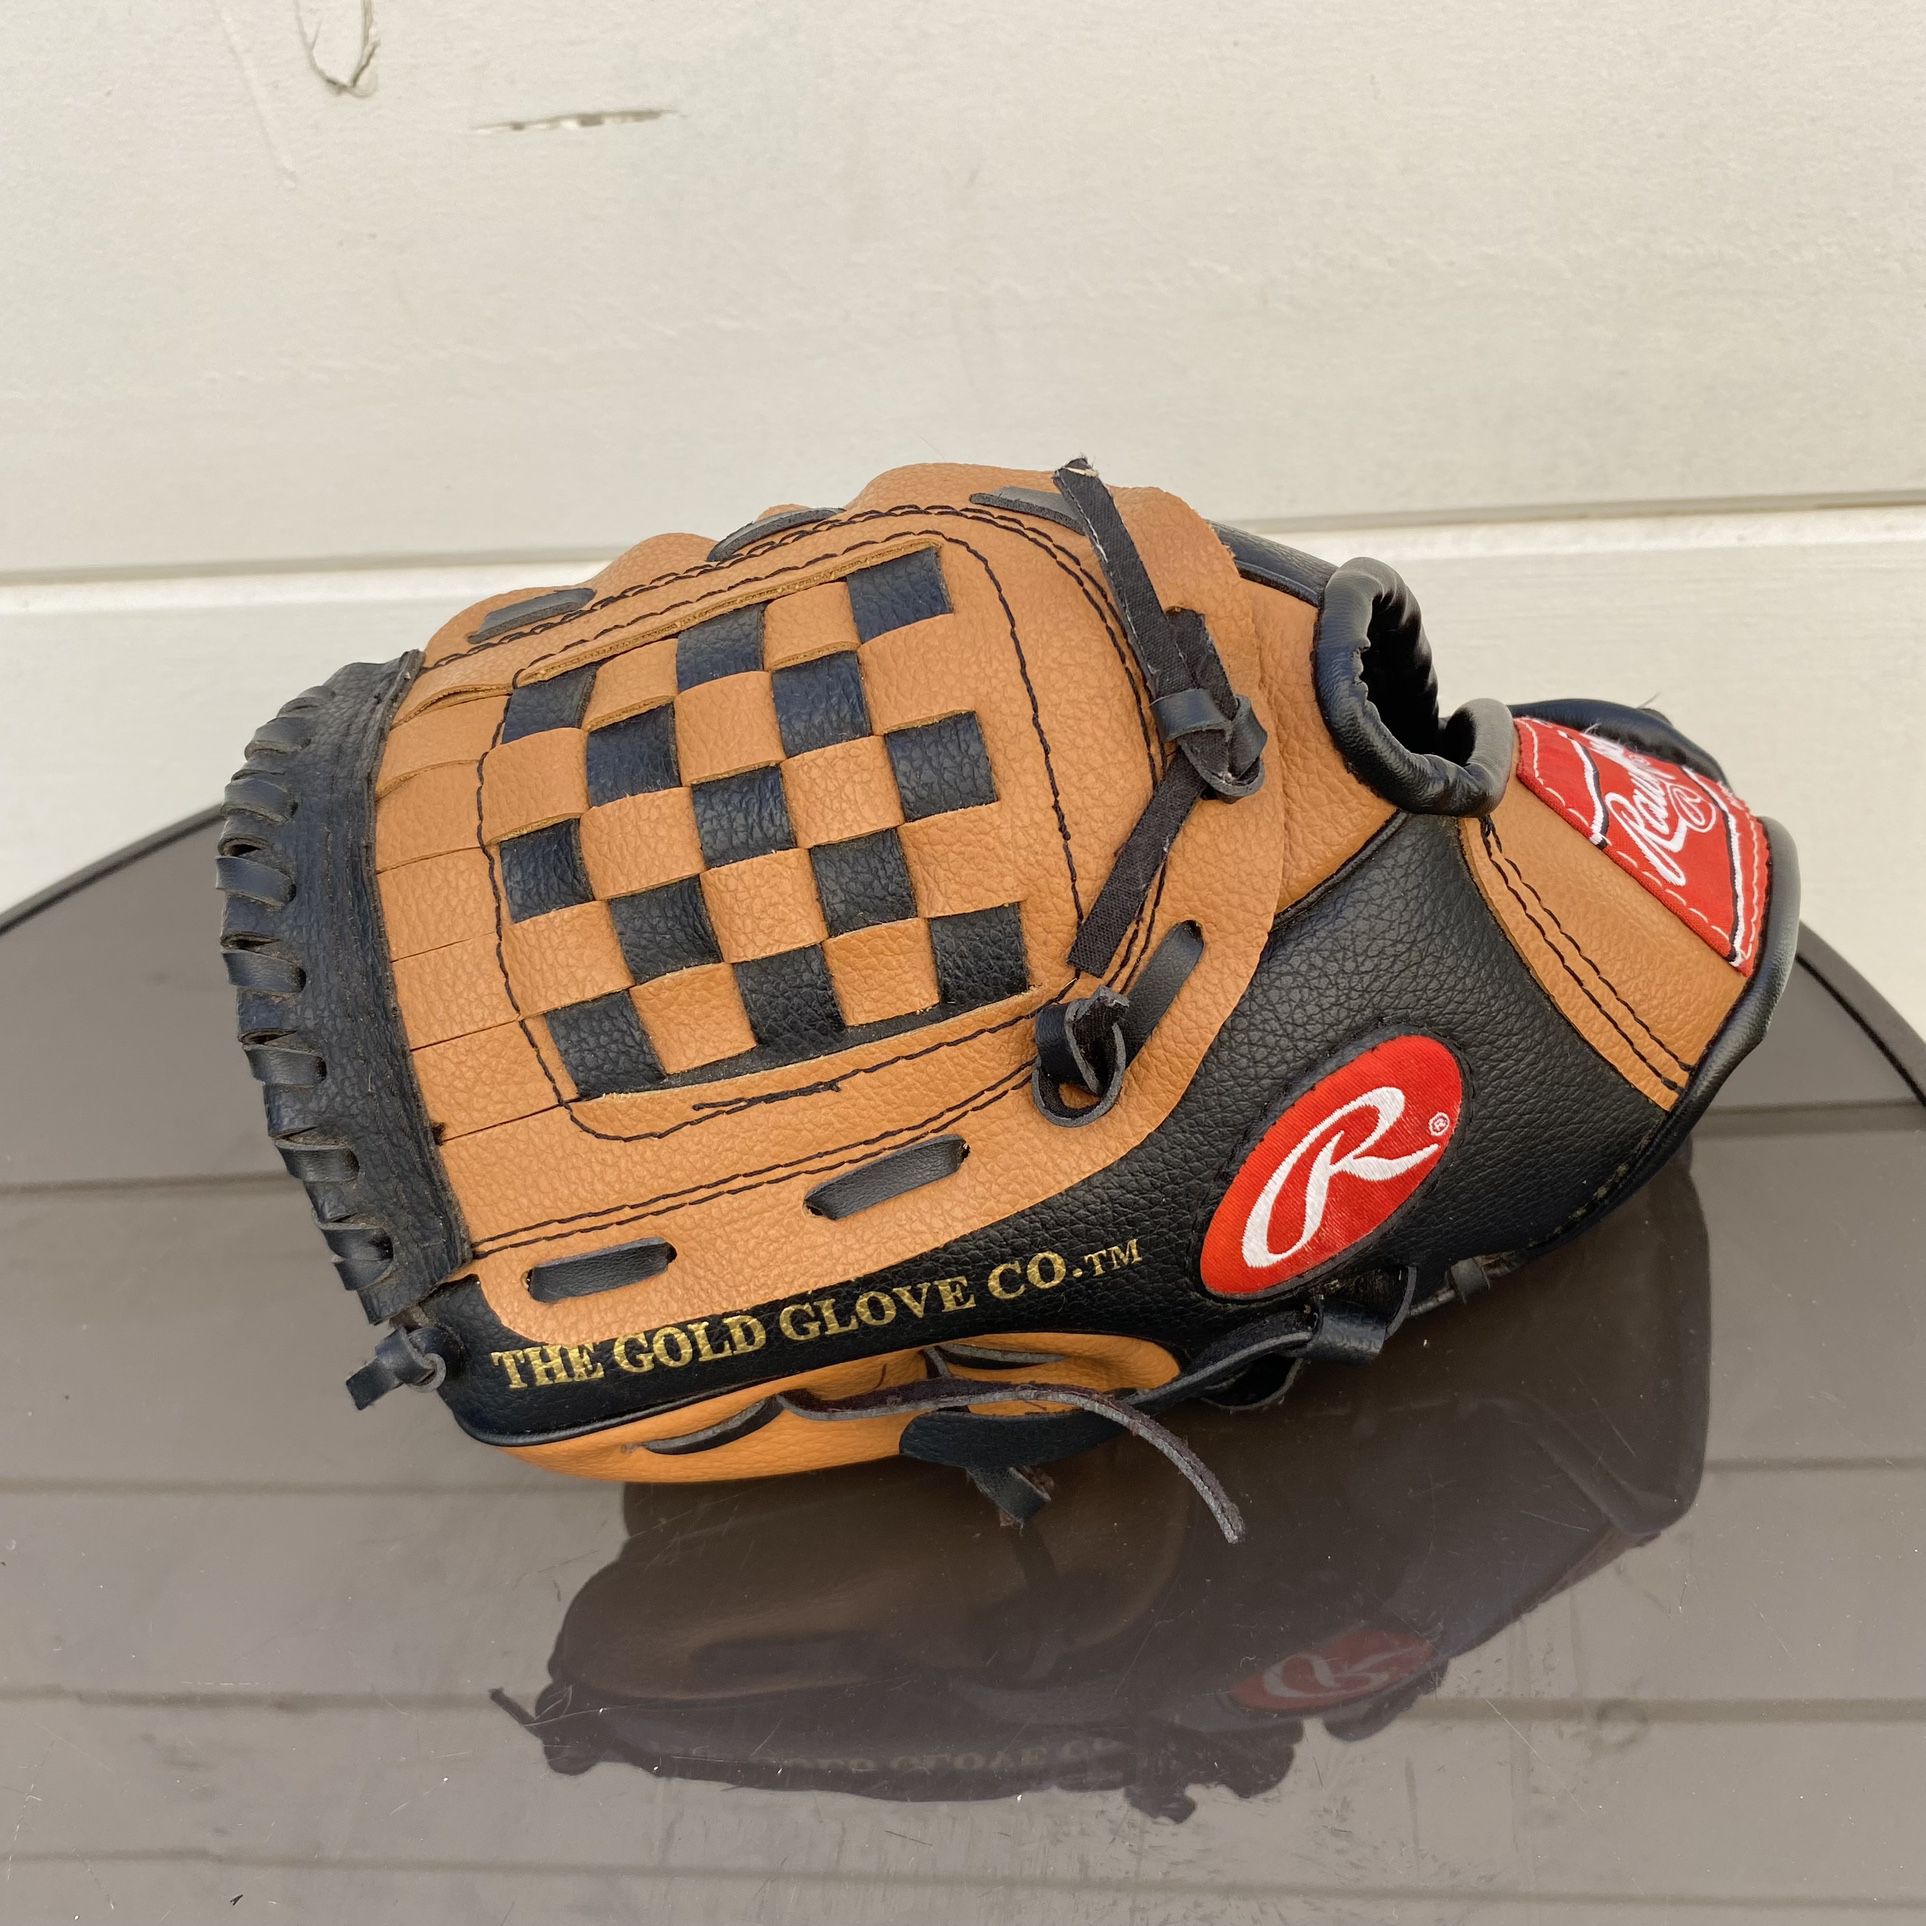 Pre- Owned Rawlings Player Series Baseball Glove PL100TB Size 10 inch